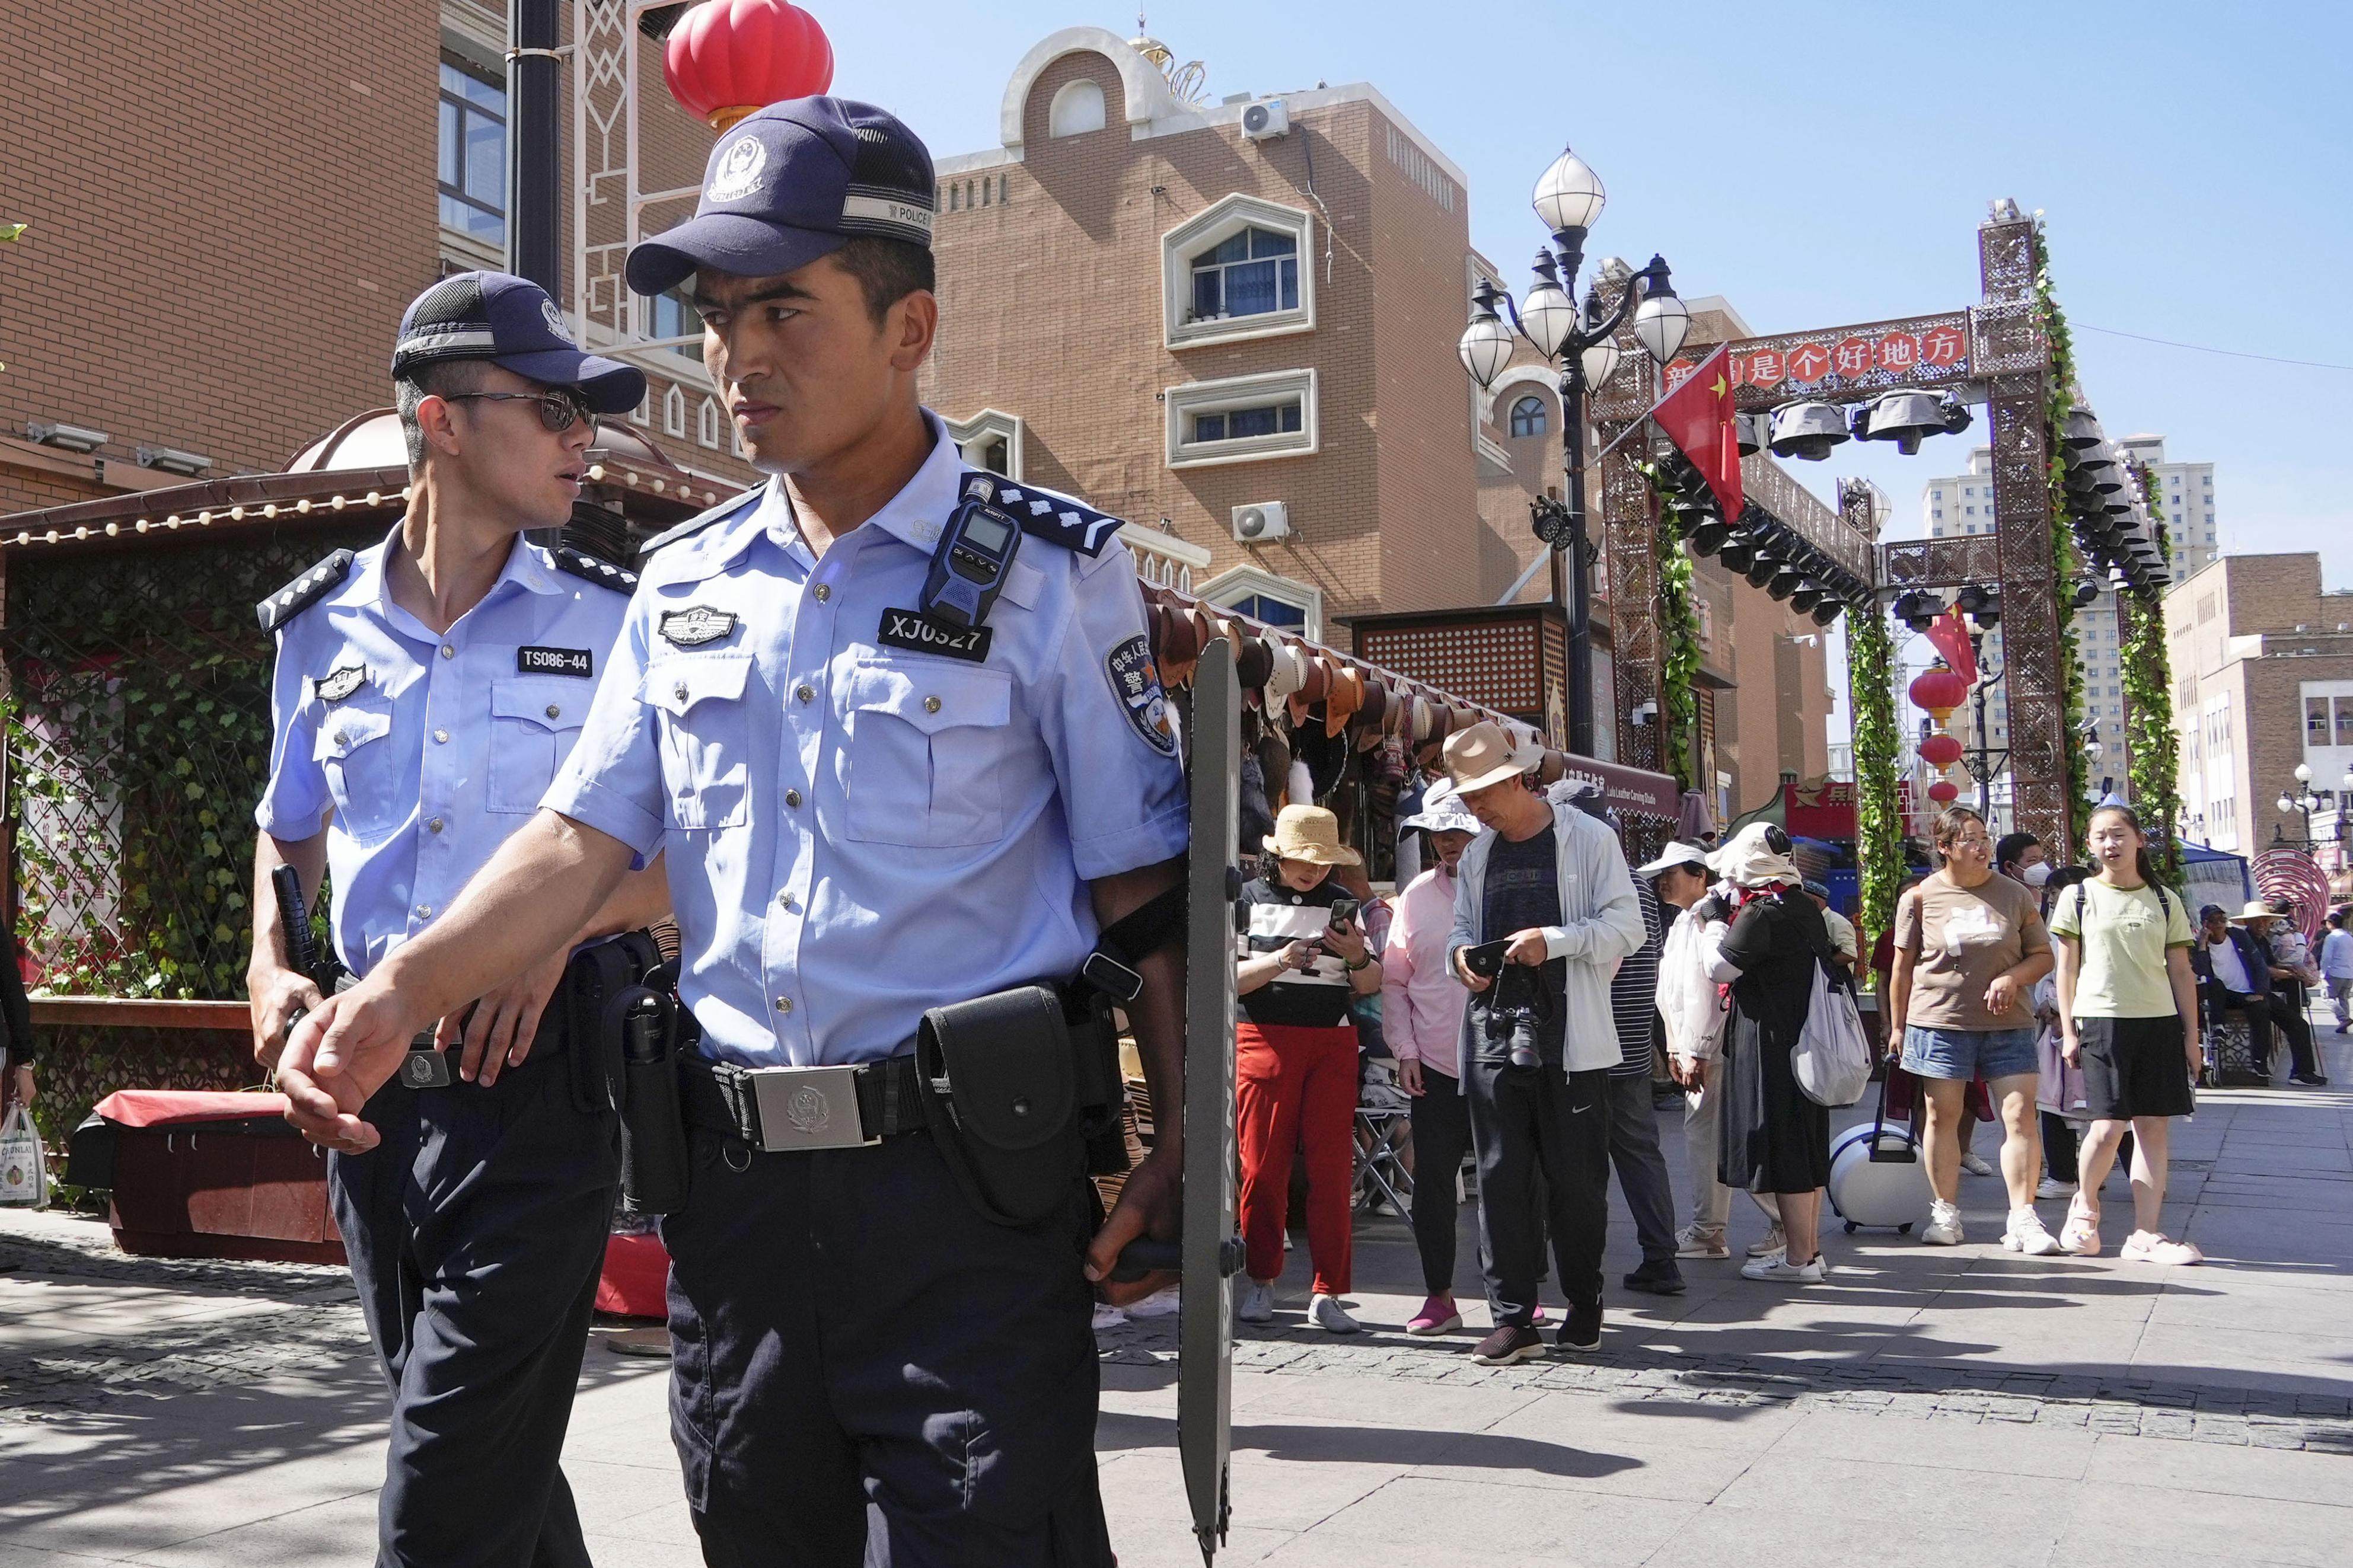 Armed police officers stand guard at the Grand Bazaar in Urumqi, Xinjiang. Photo: Kyodo